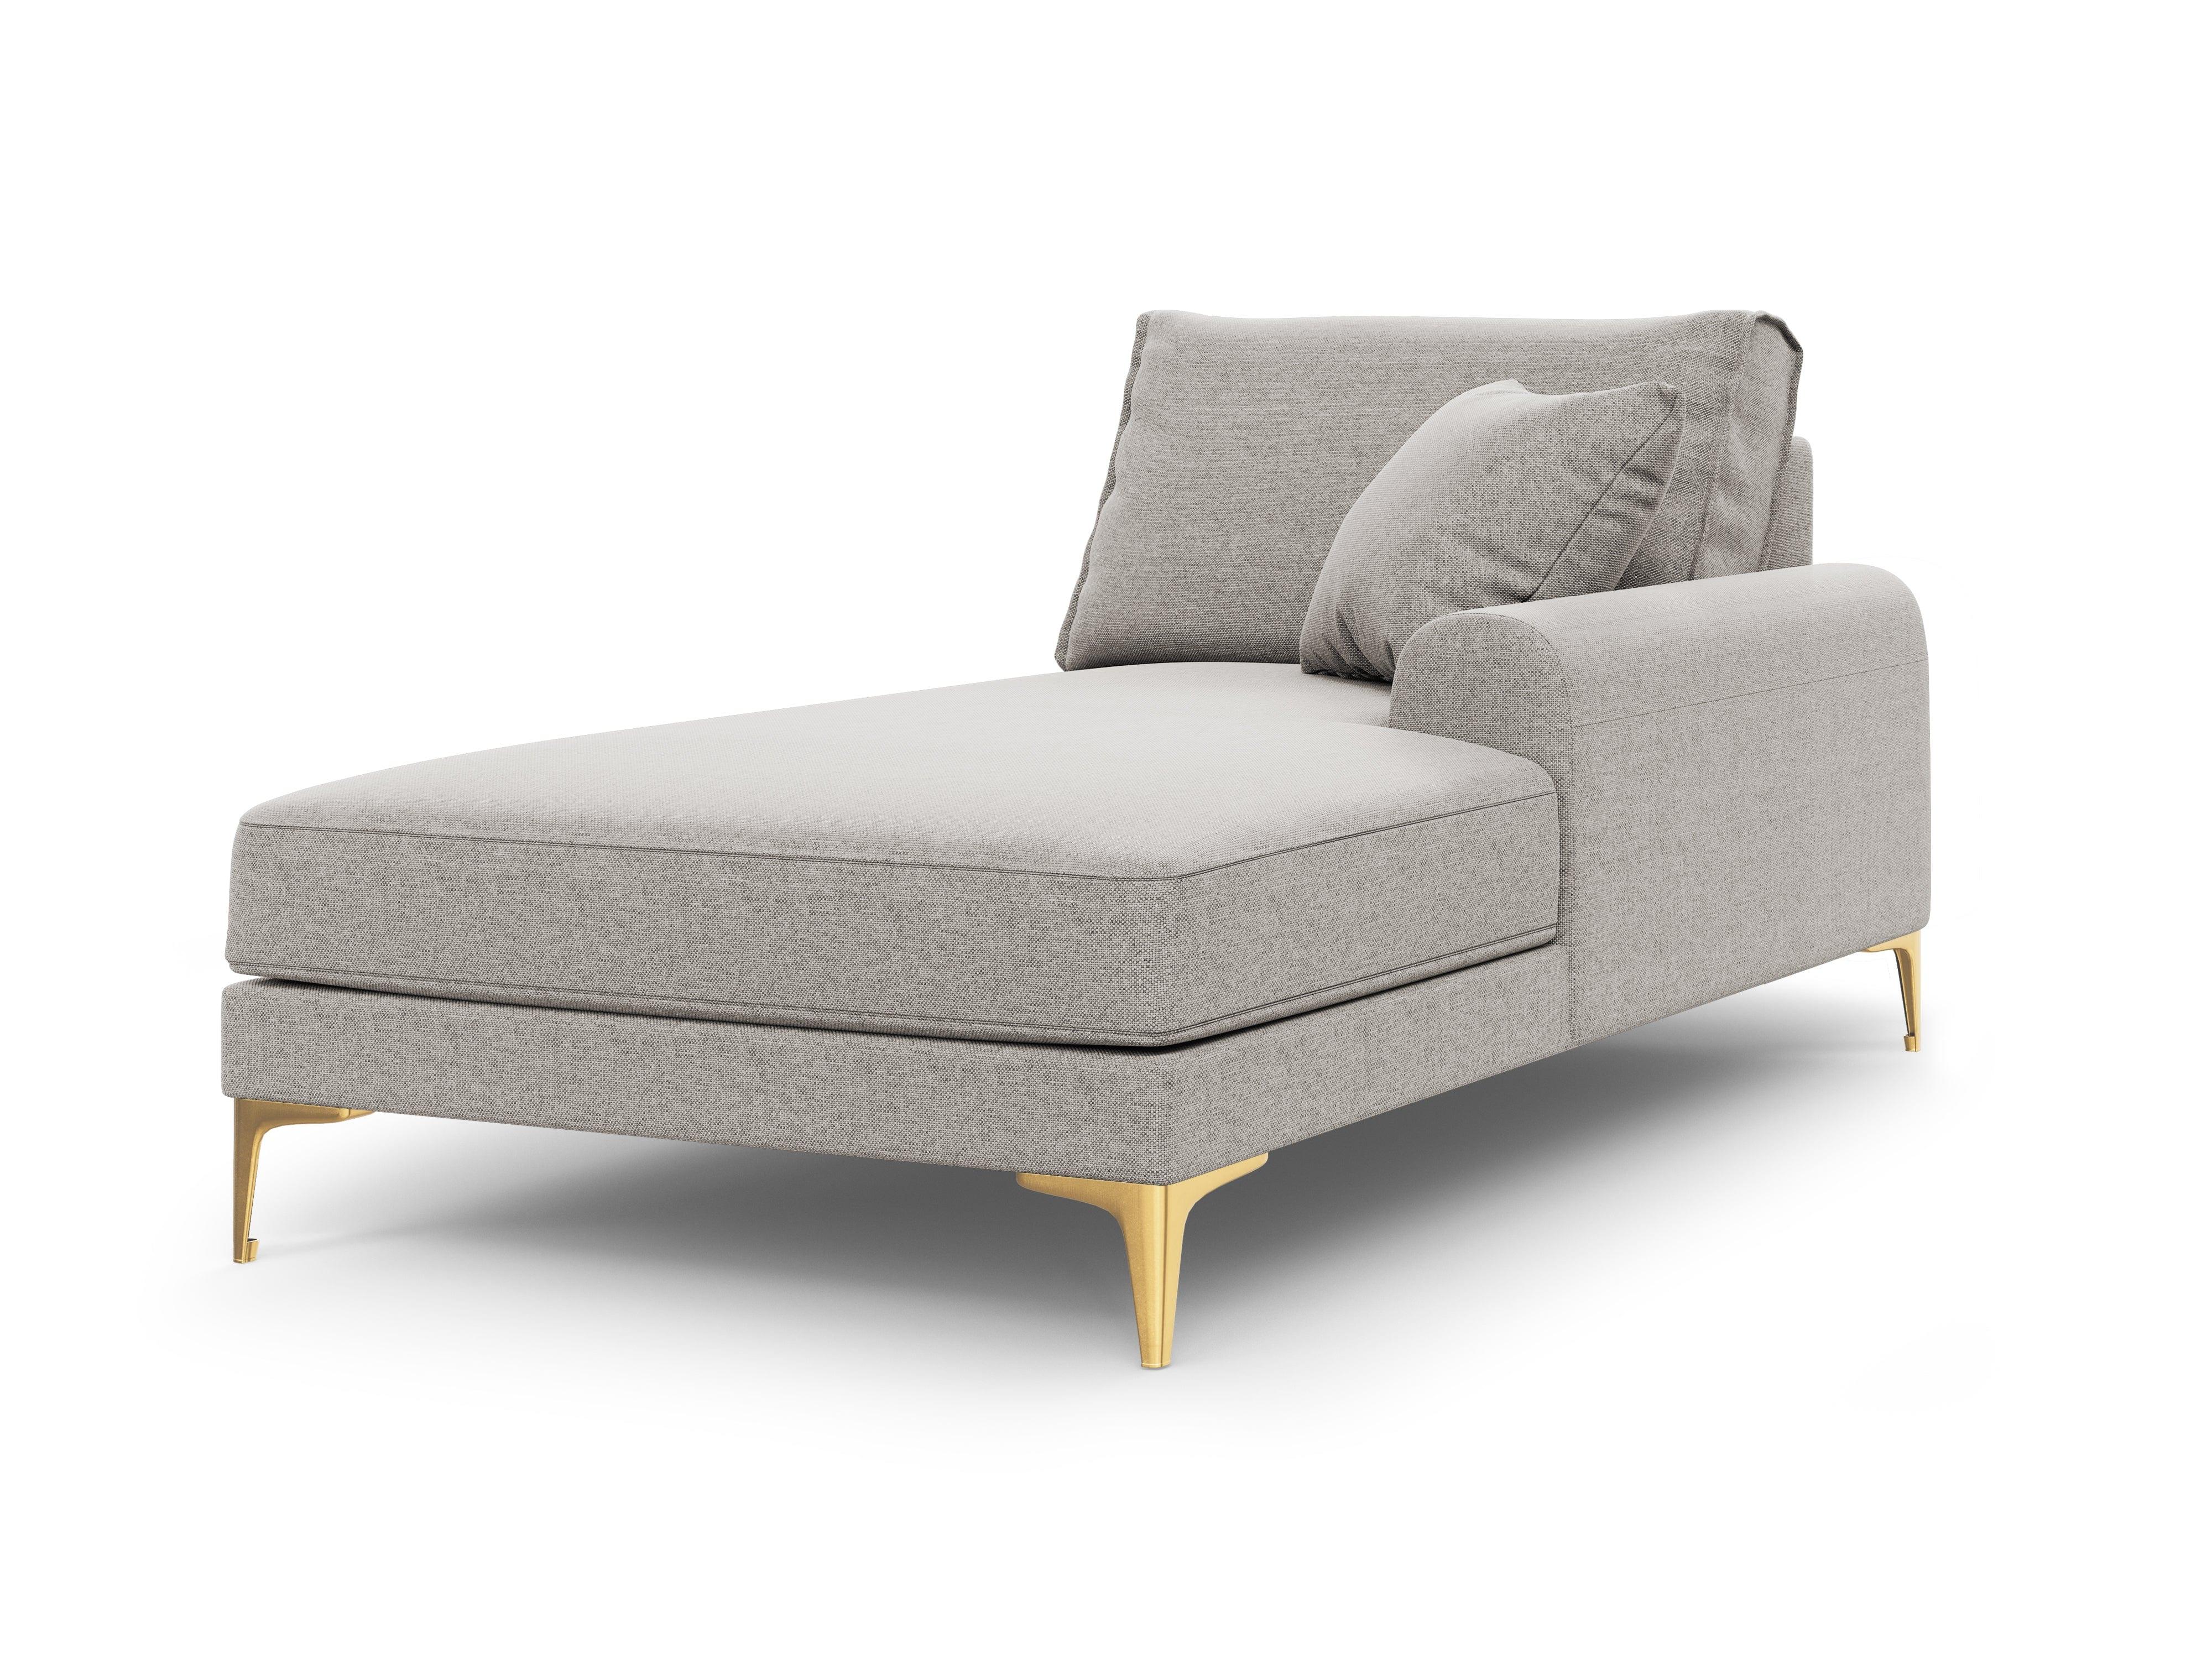 Chaise Longue Right, "Larnite", 1 Seat, 102x182x90
Made in Europe, Micadoni, Eye on Design